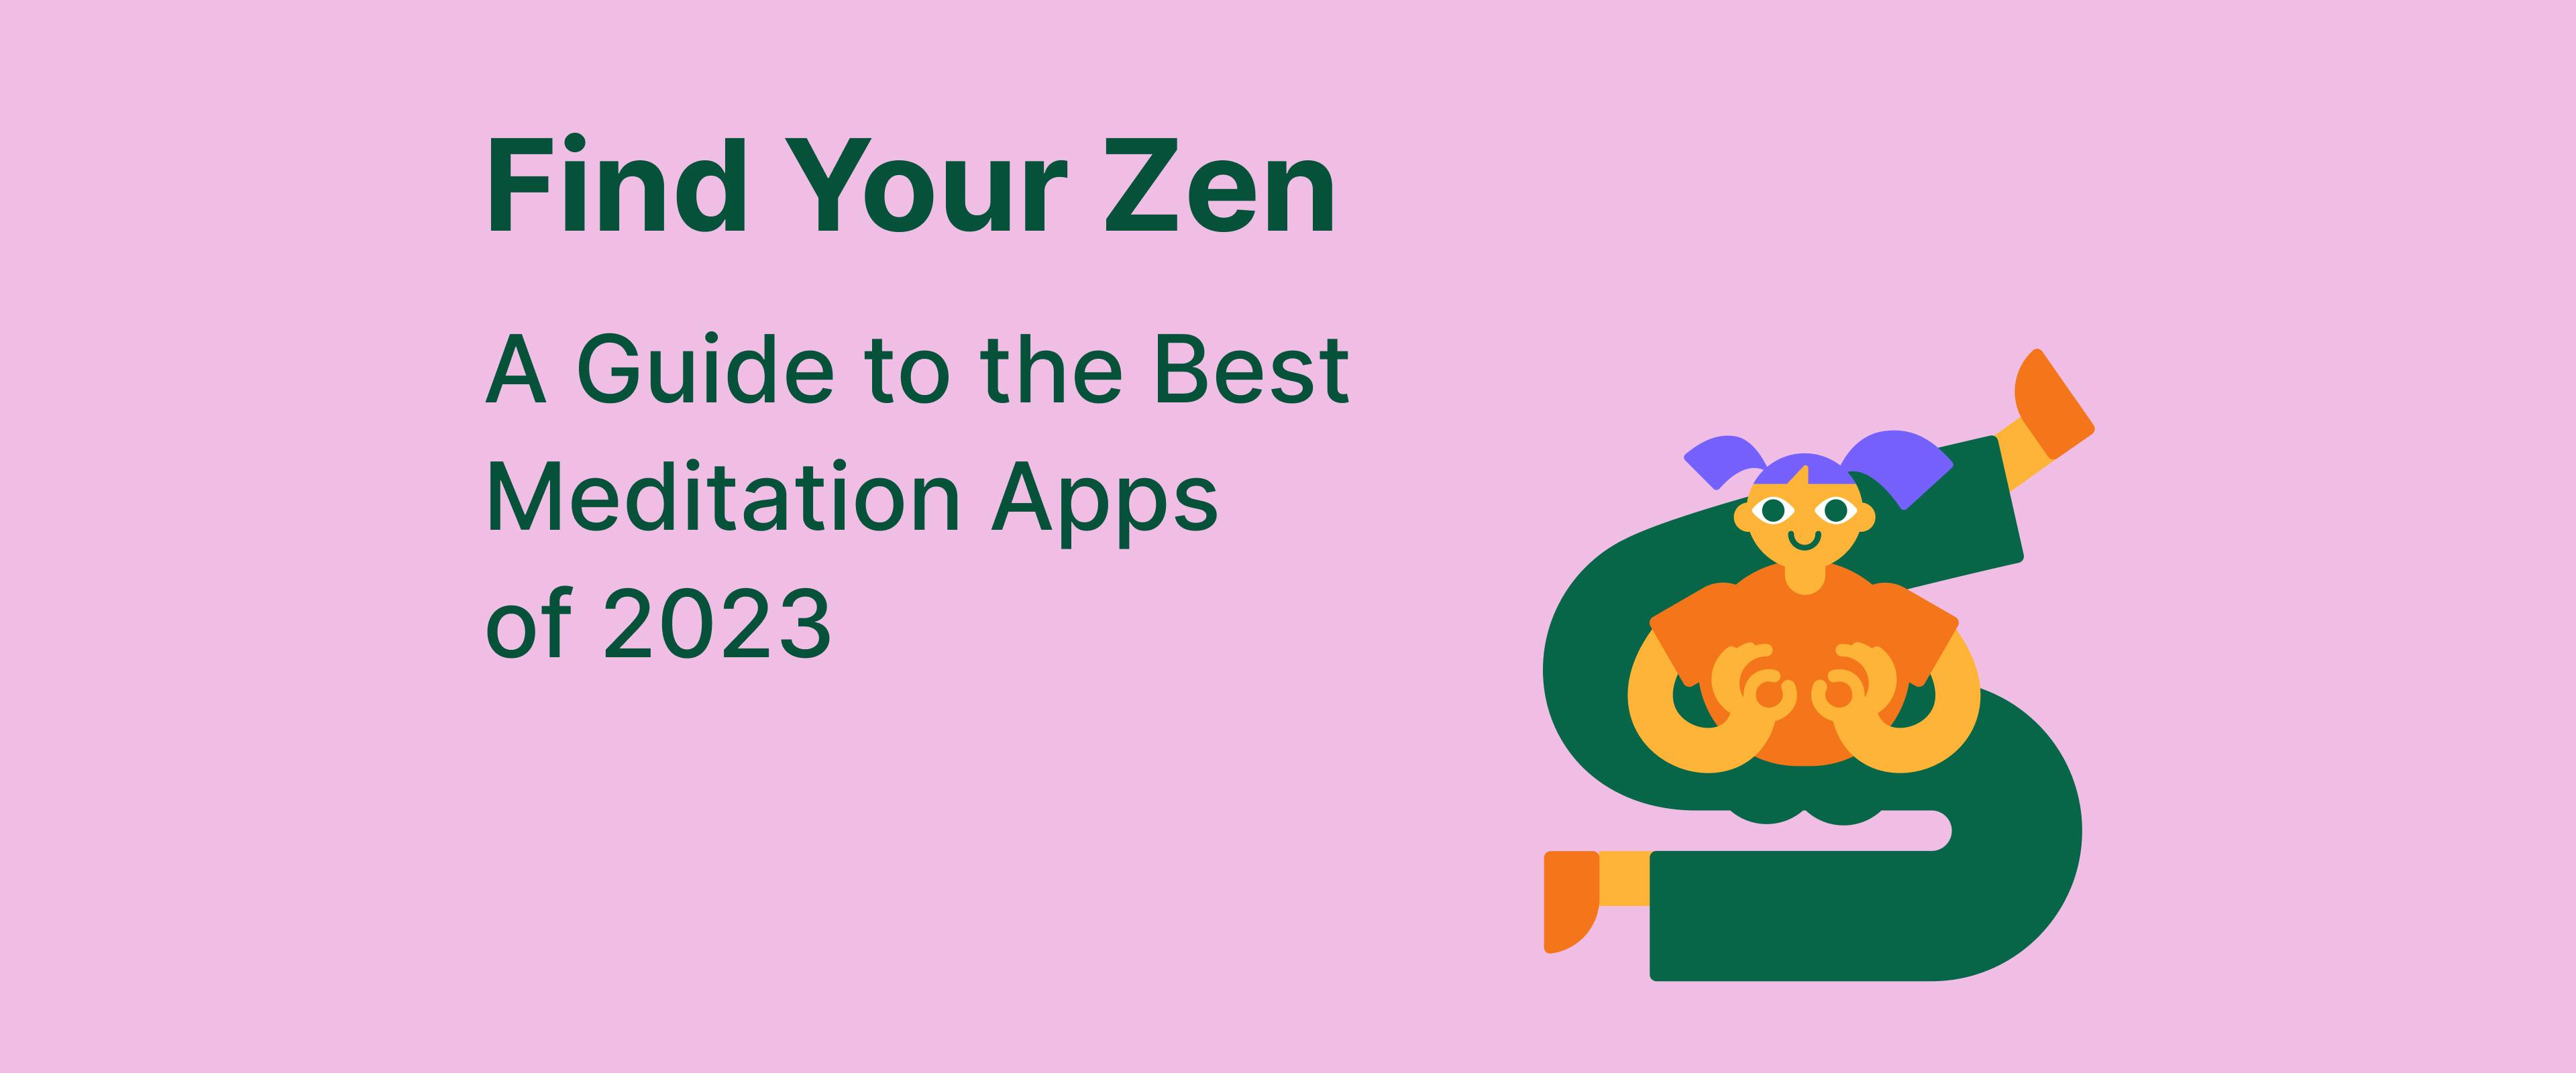 Find Your Zen: A Guide to the Best Meditation Apps of 2023 - Headway App